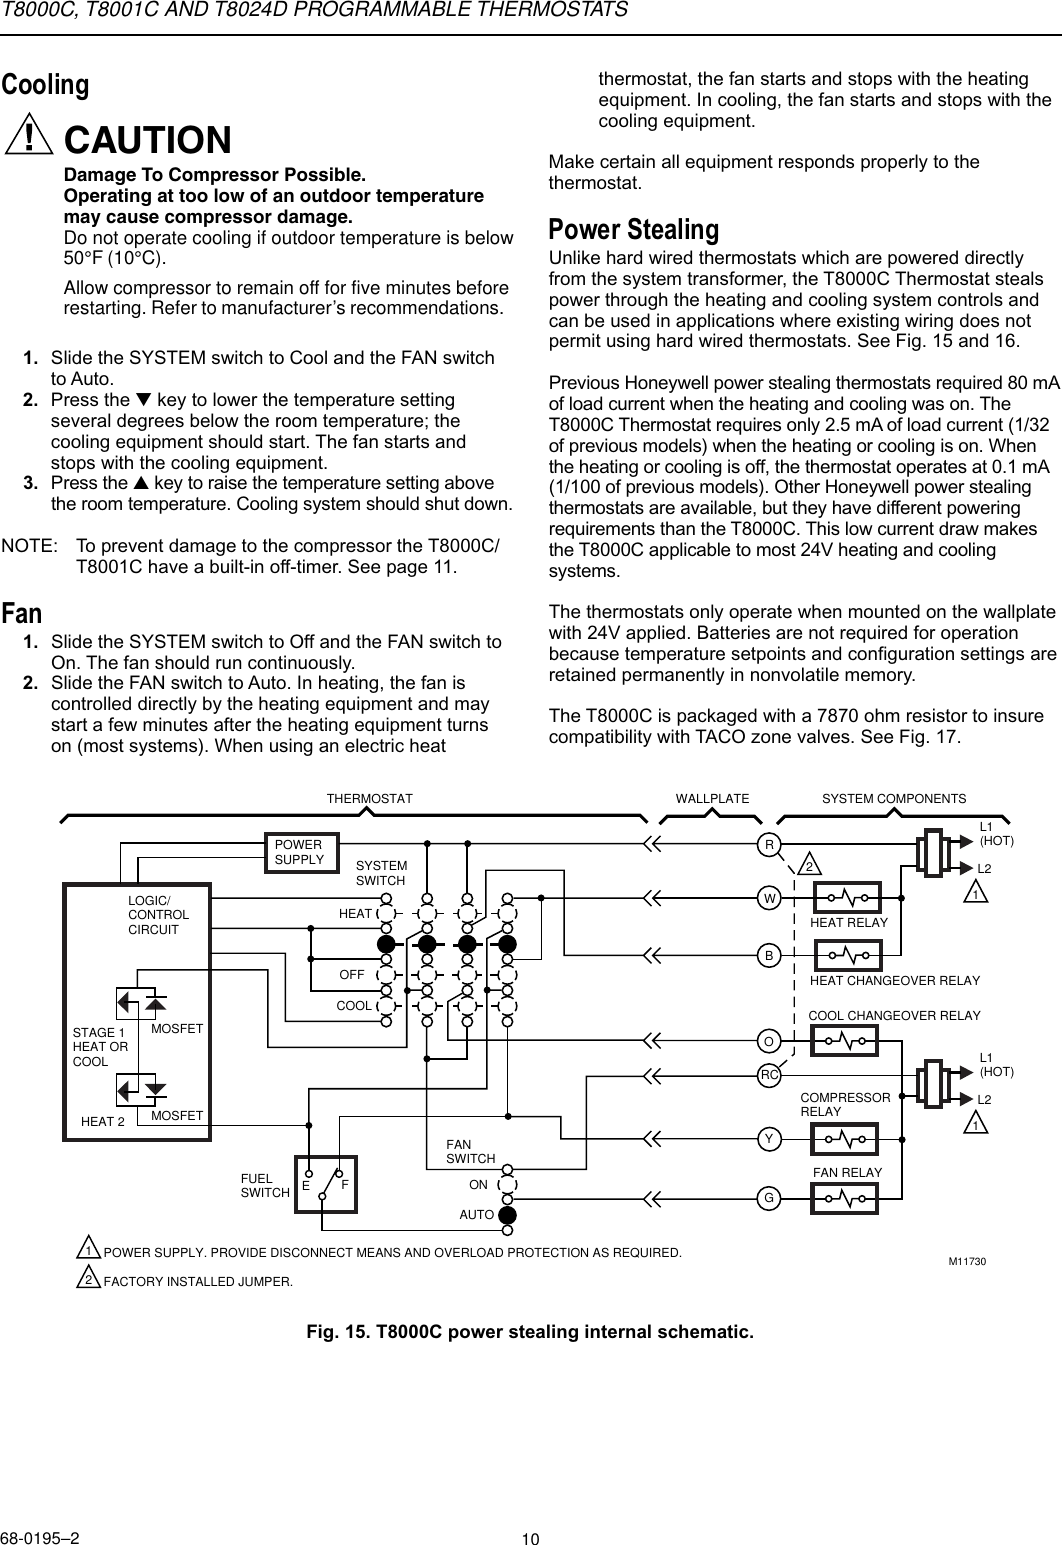 Page 10 of 12 - Honeywell Honeywell-T8024D-Users-Manual- 68-0195  Honeywell-t8024d-users-manual